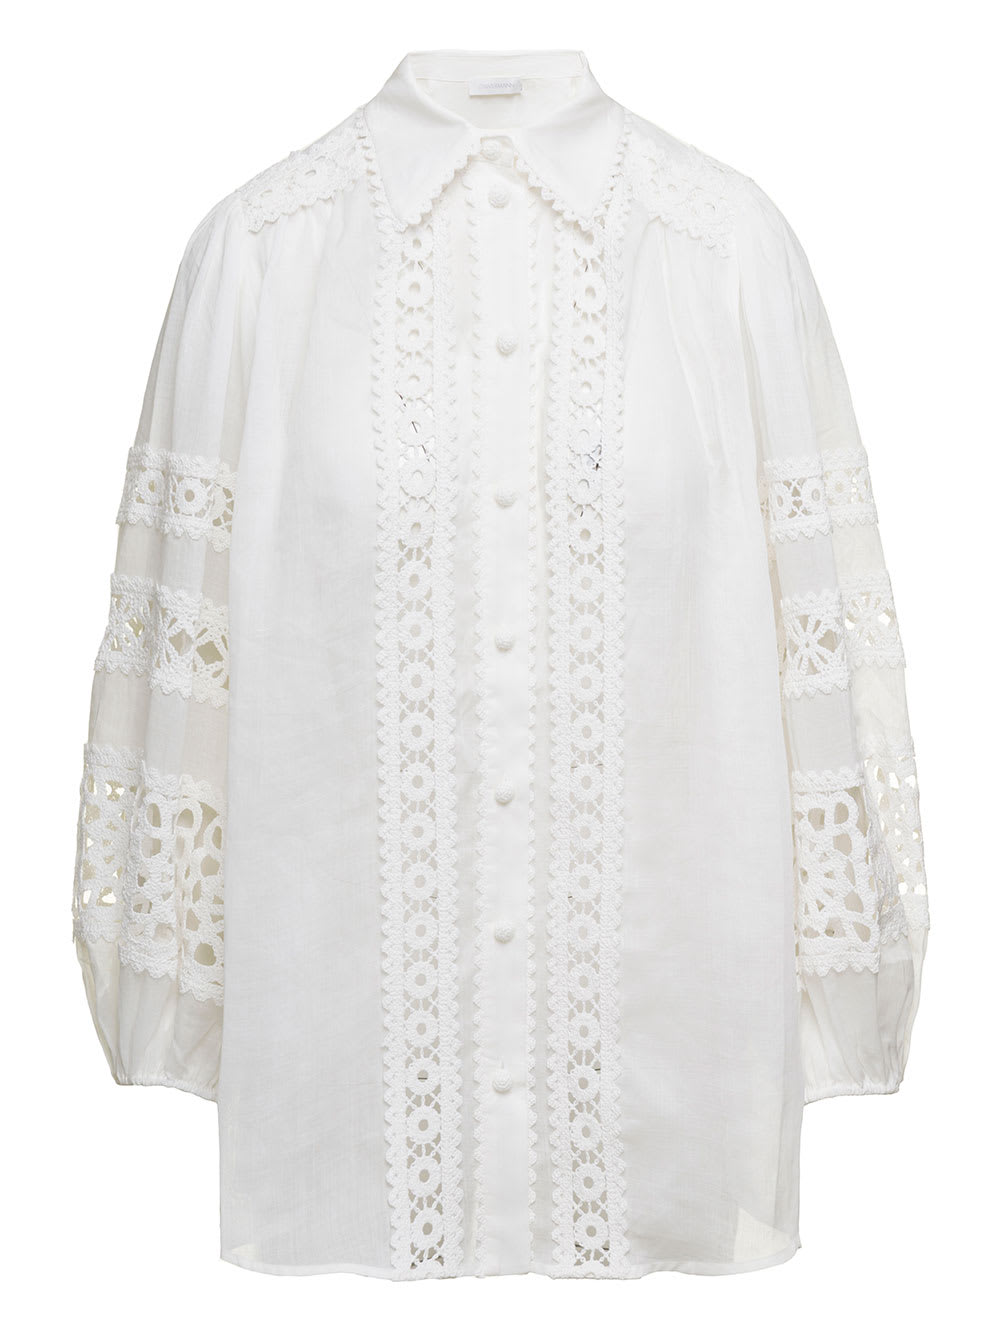 ZIMMERMANN DEVI WHITE SHIRT WITH LACE DETAILS IN RAMIE WOMAN